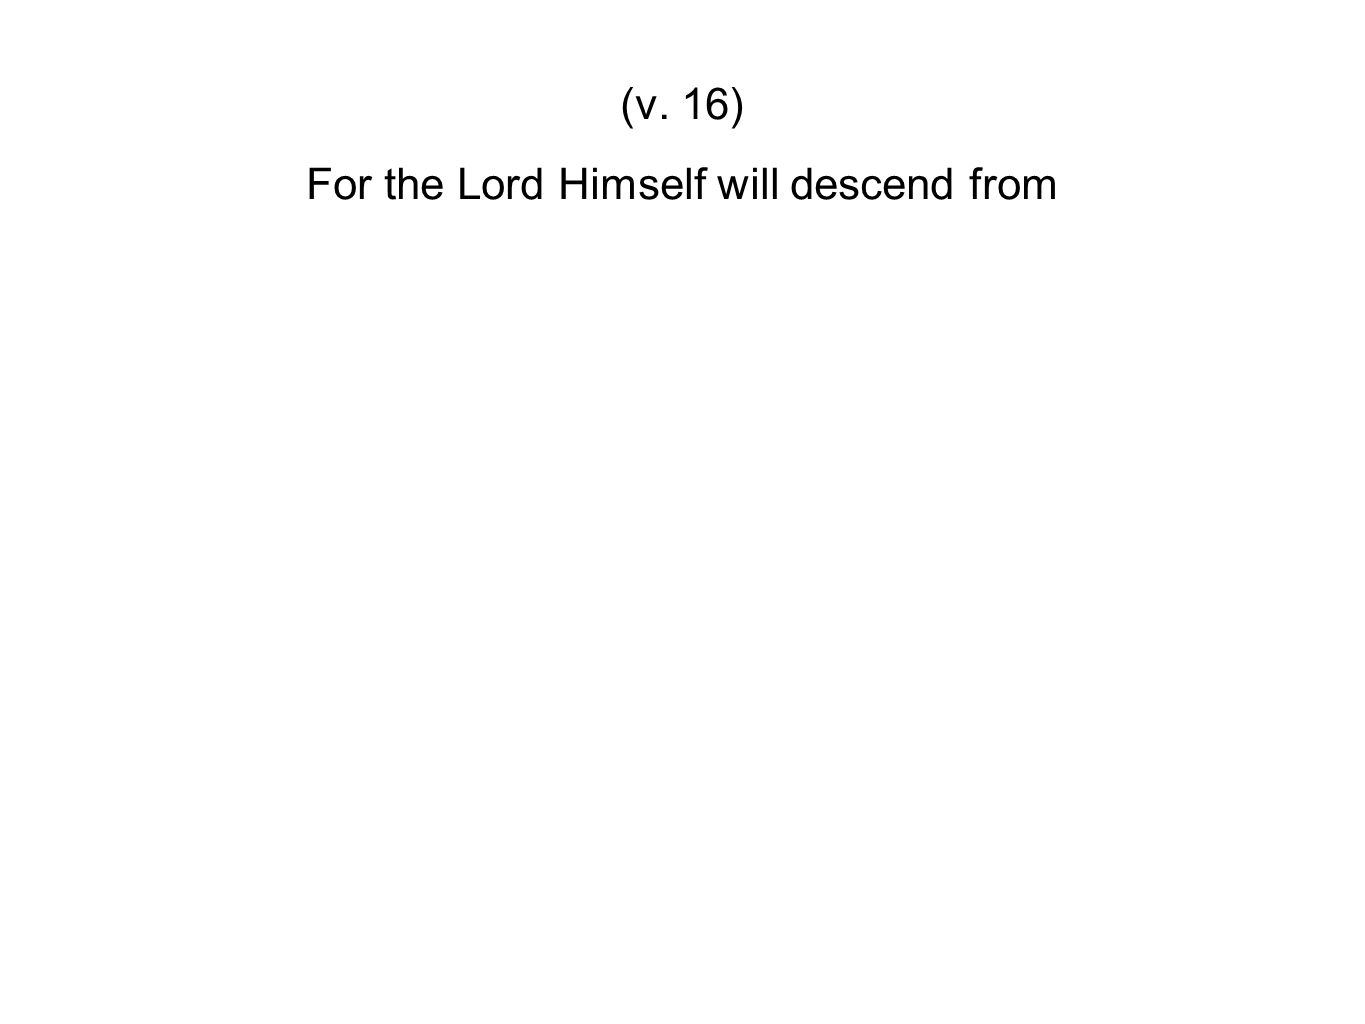 For the Lord Himself will descend from